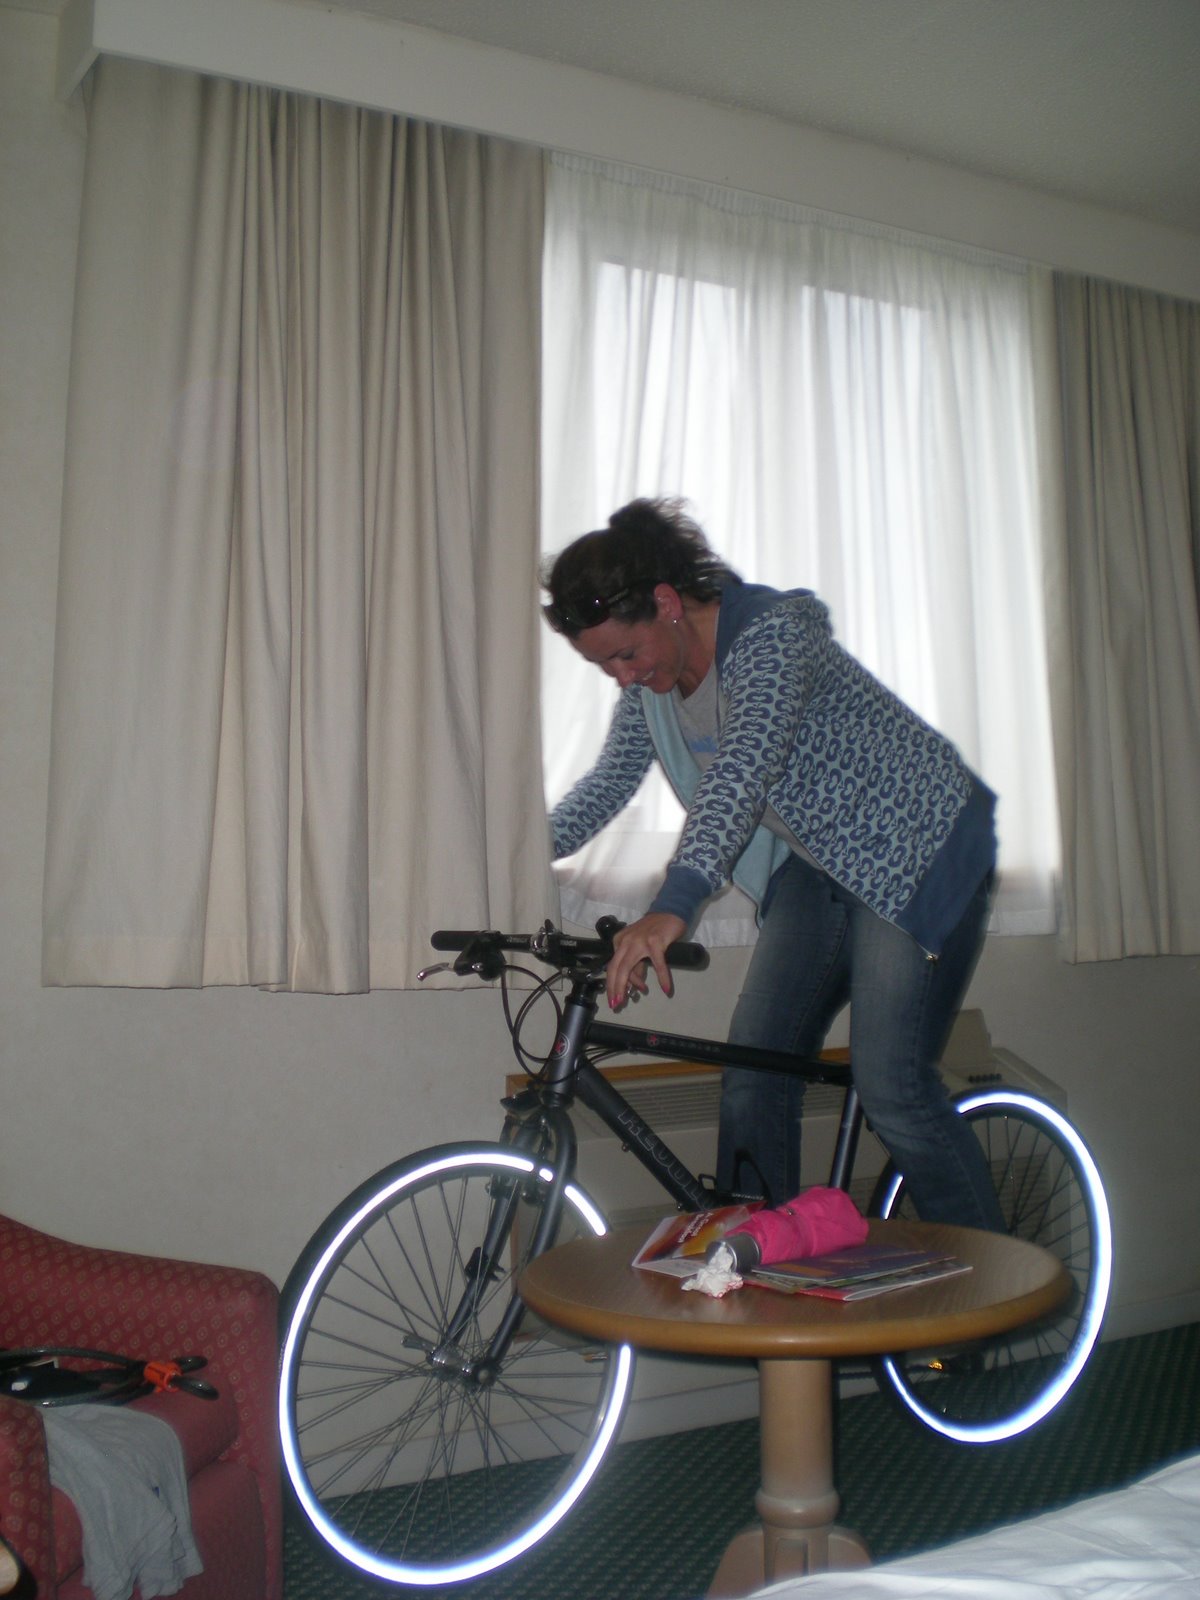 [trying+out+the+bike+in+hotel.JPG]